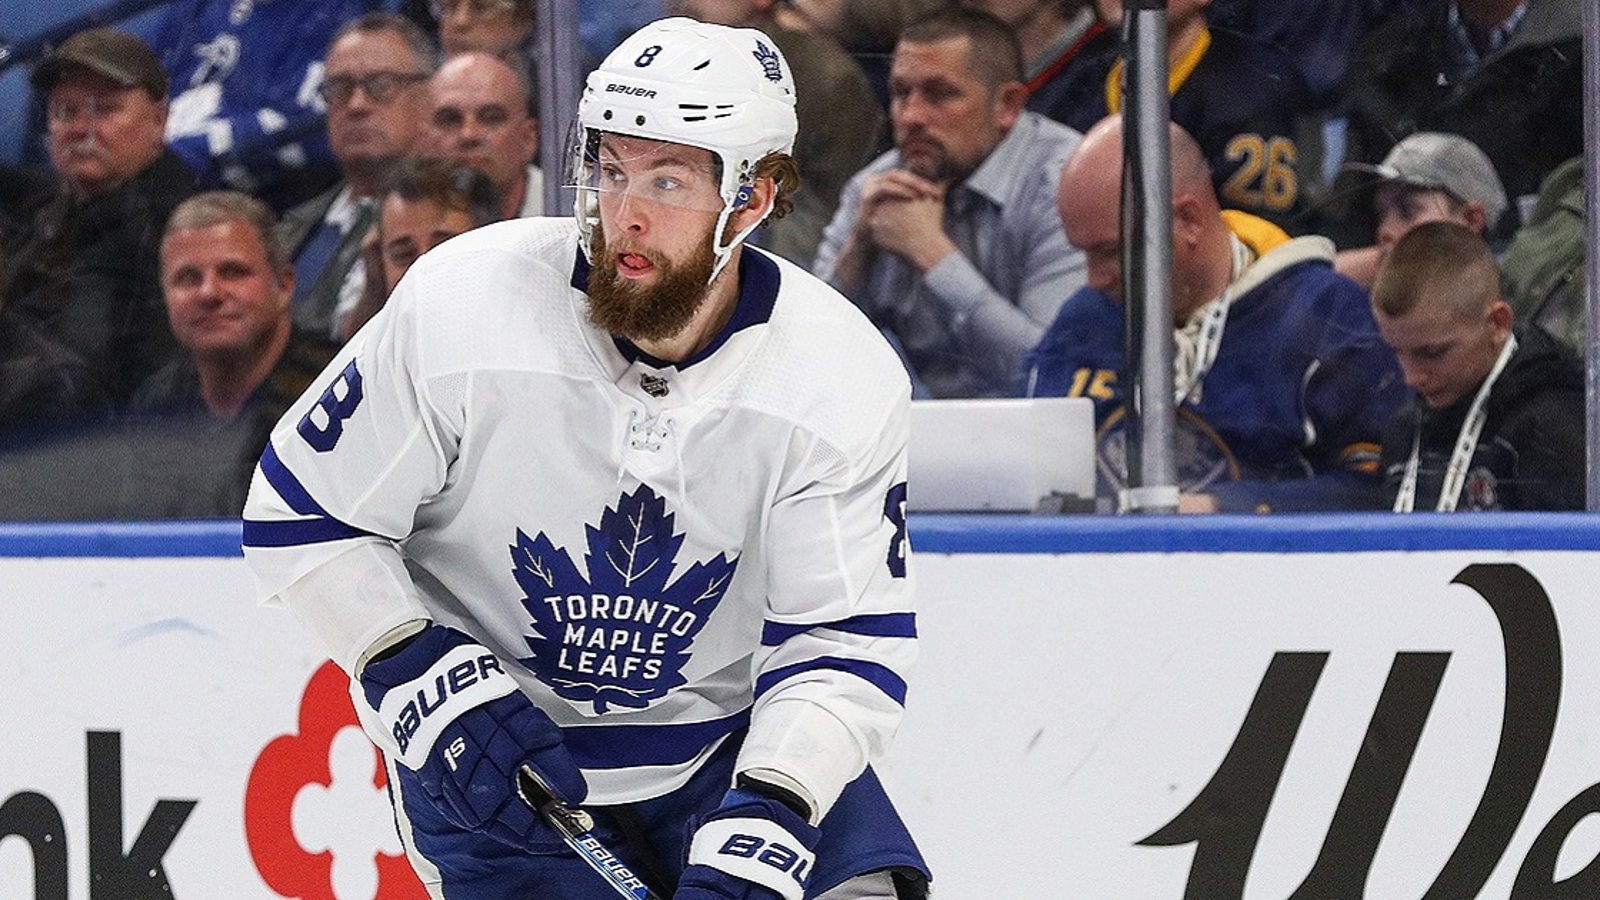 Sheldon Keefe drops a terrible update on Jake Muzzin just hours ahead of Game 7.